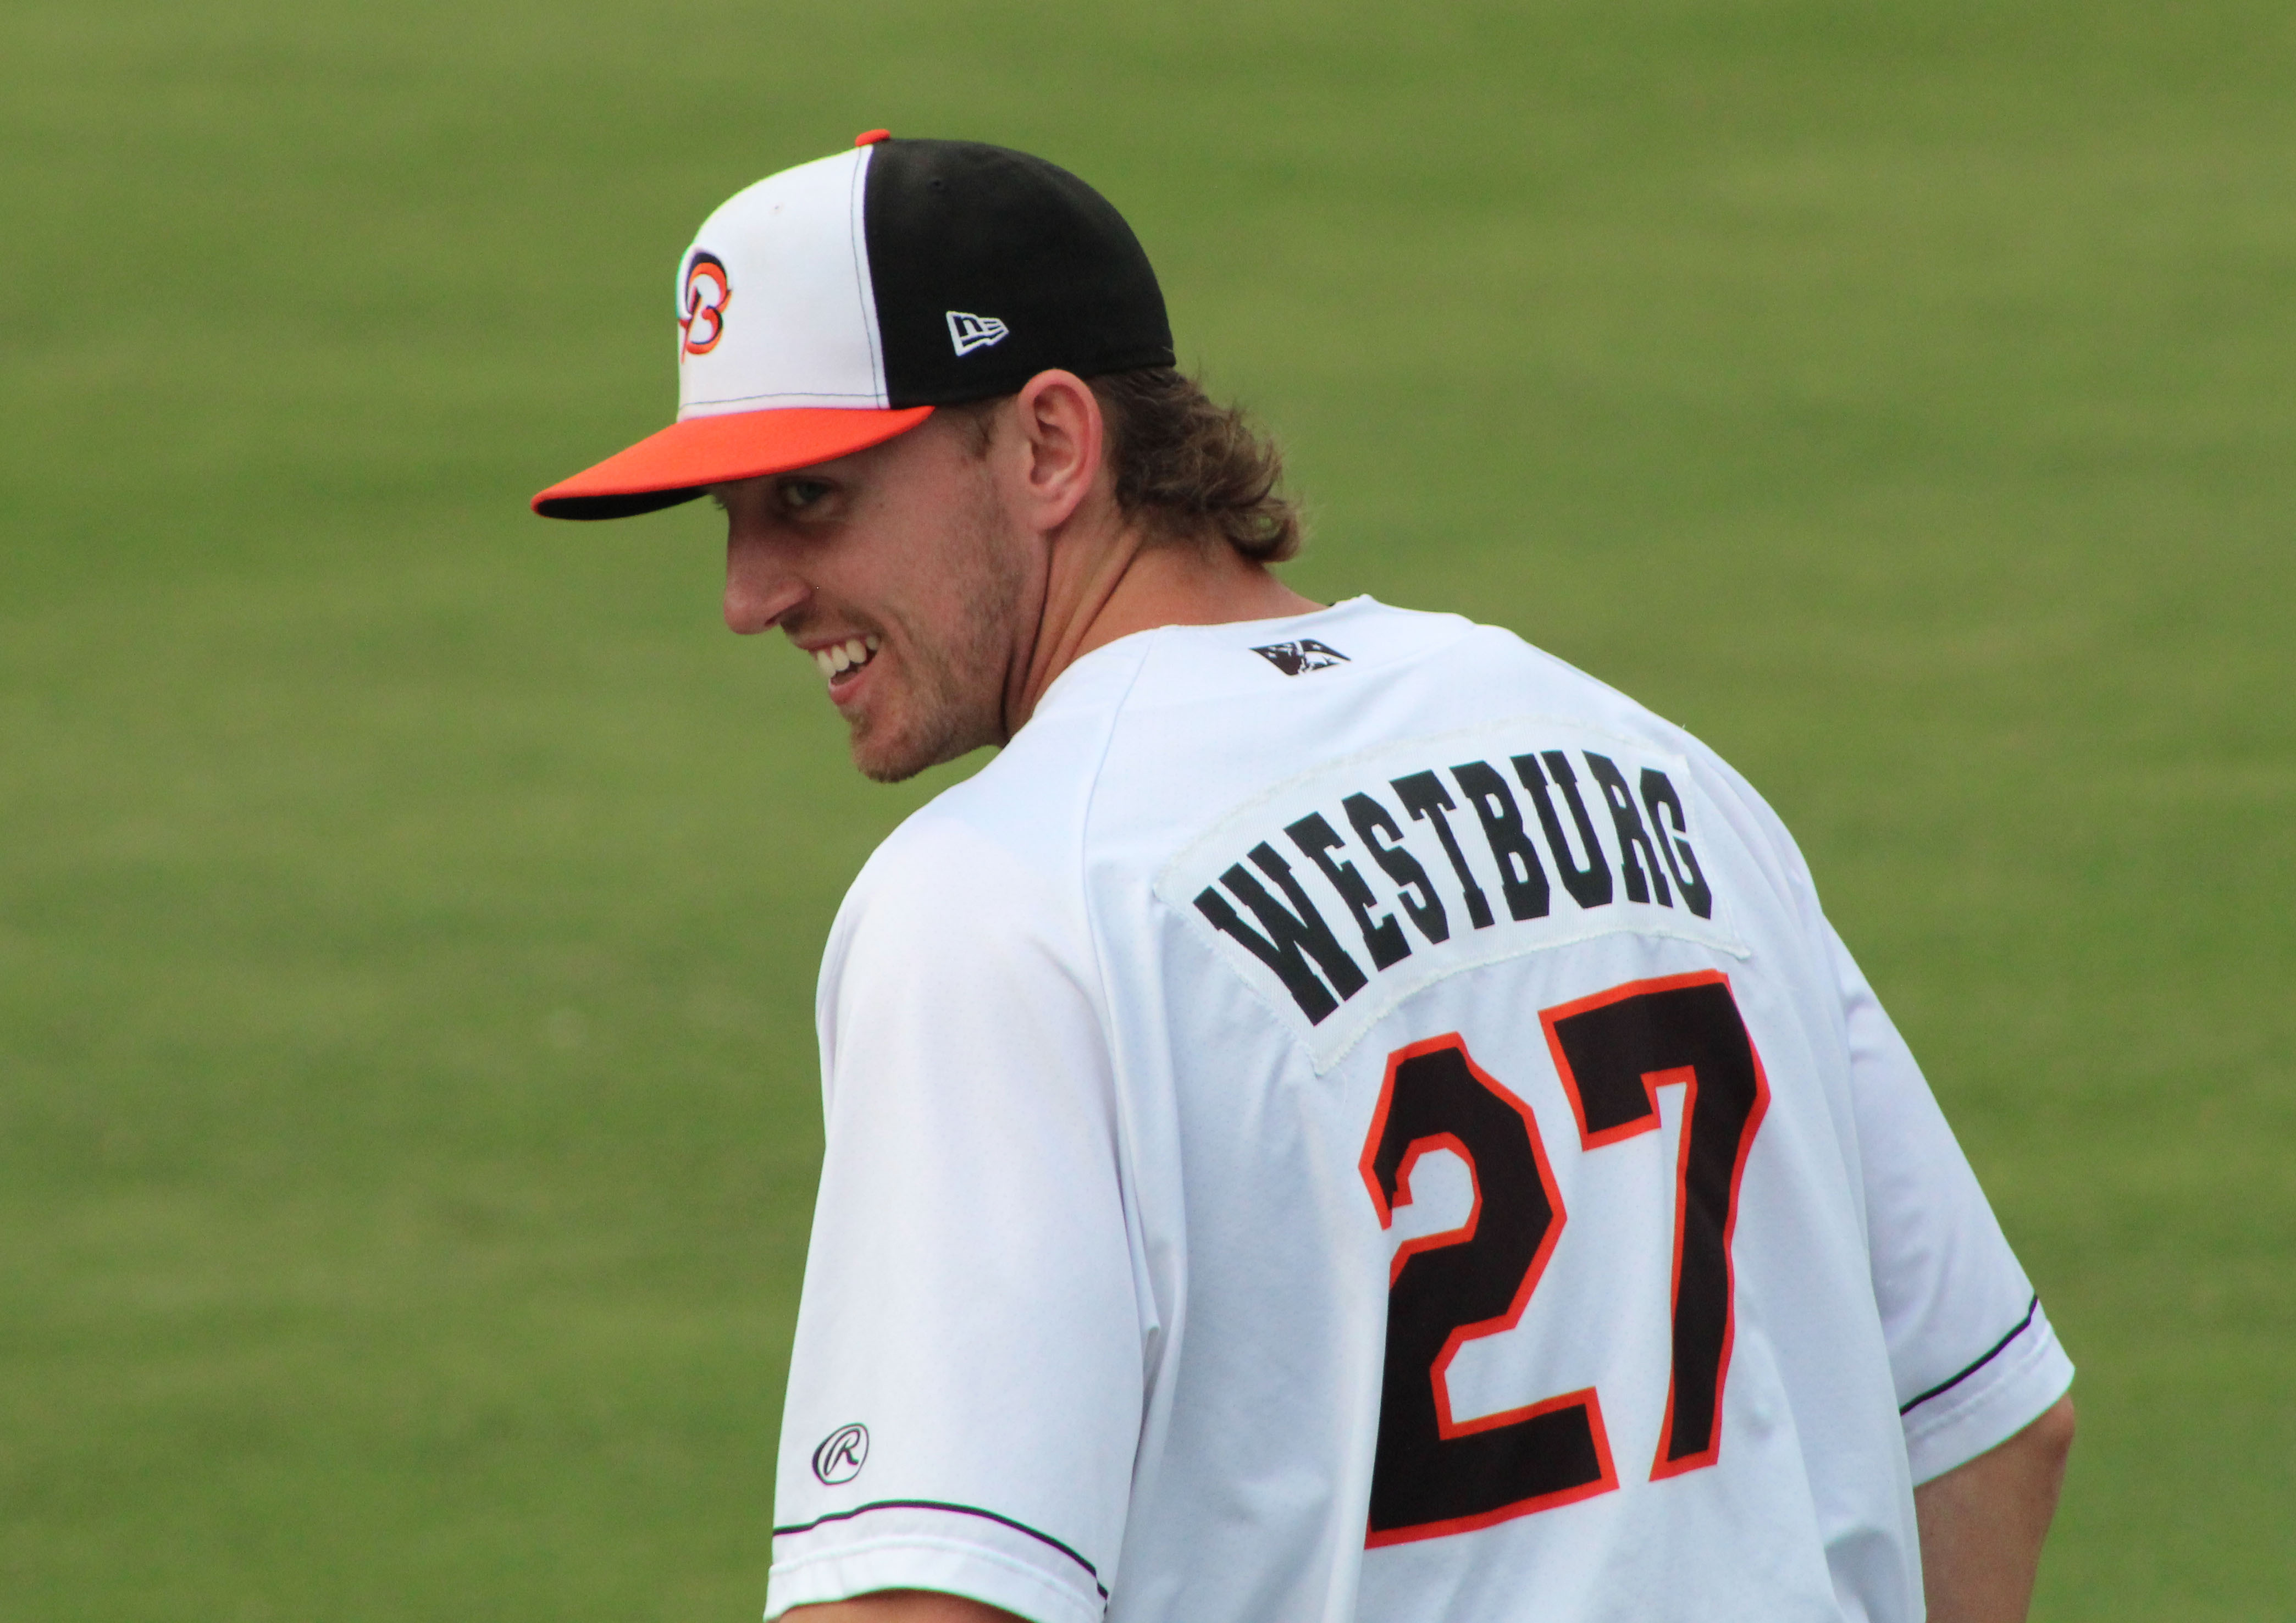 Orioles post first lineup with Westburg - Blog